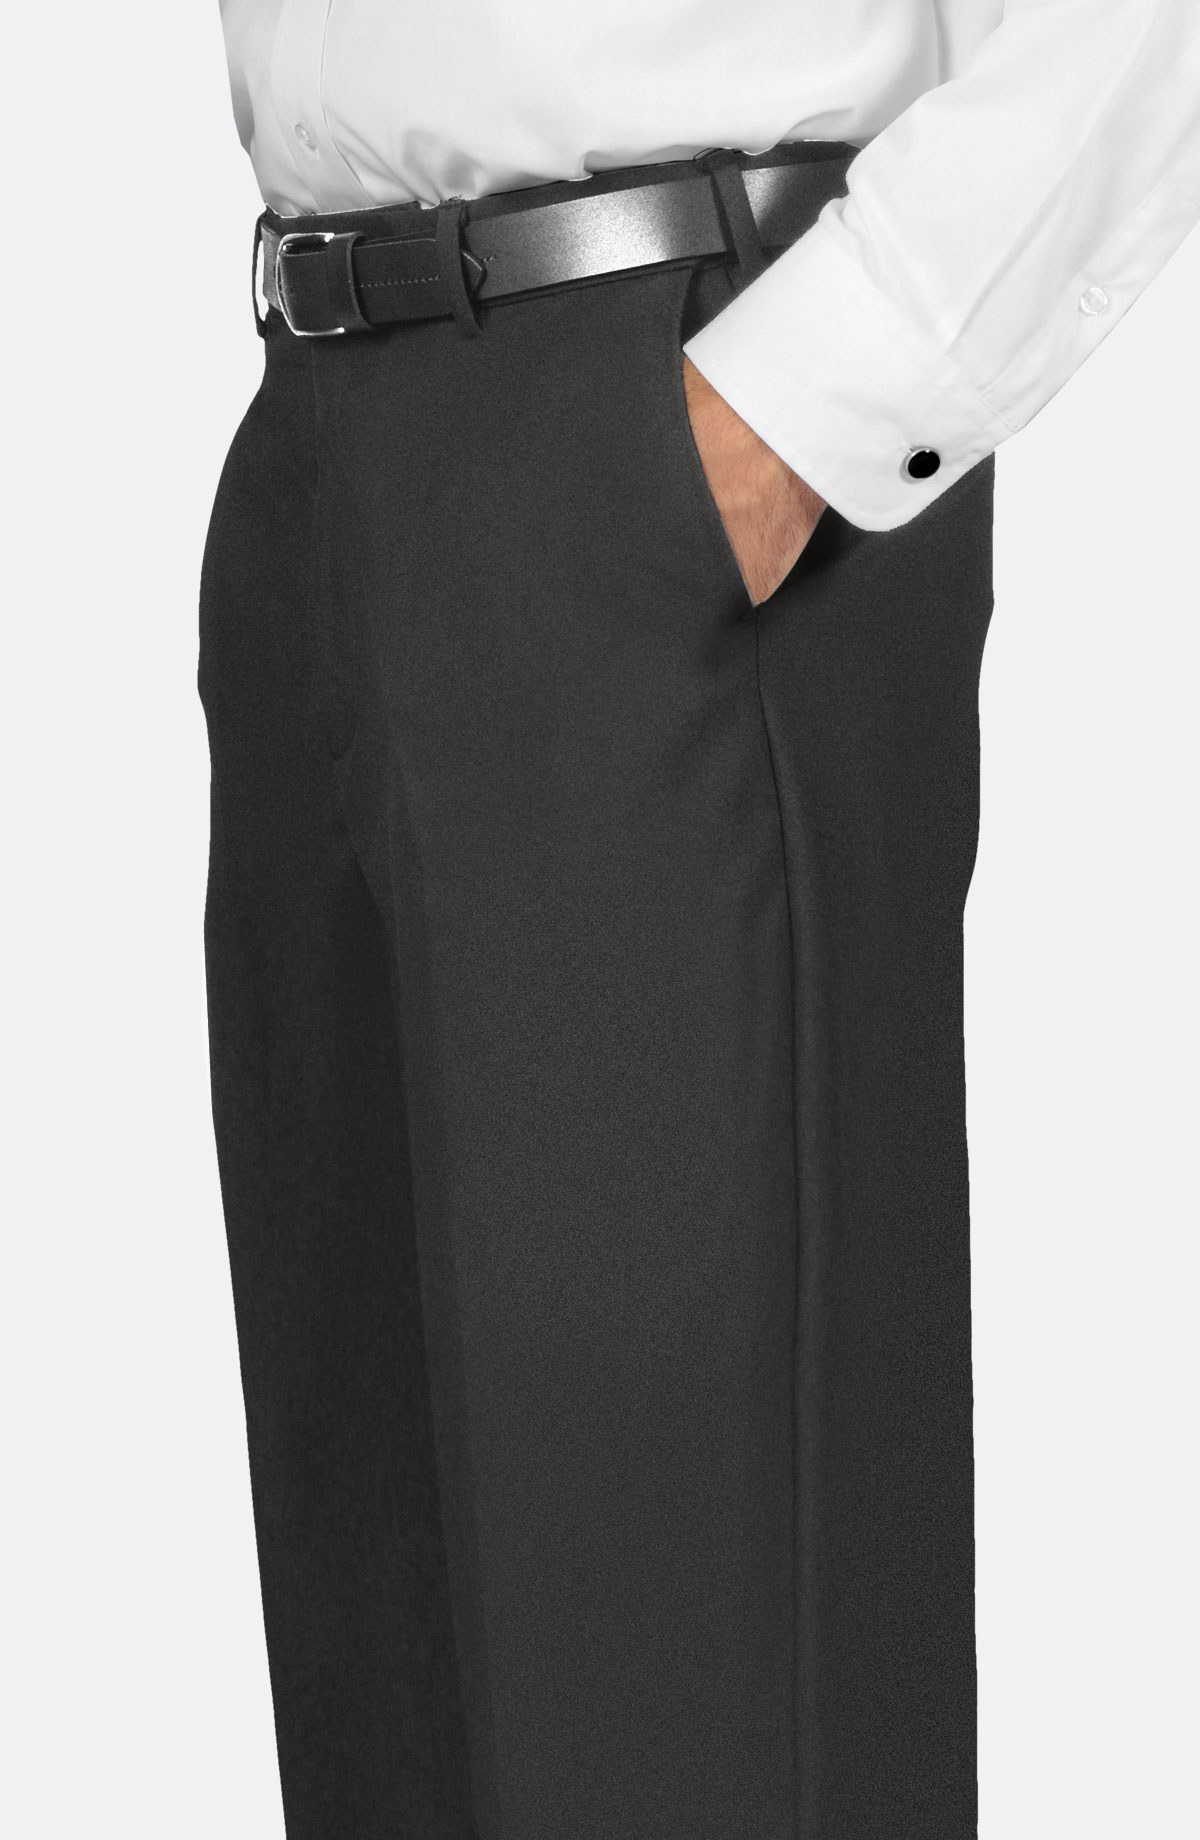 Style 2701W - Ladies Flex Fit Waist Dress Pant with Tailored Front